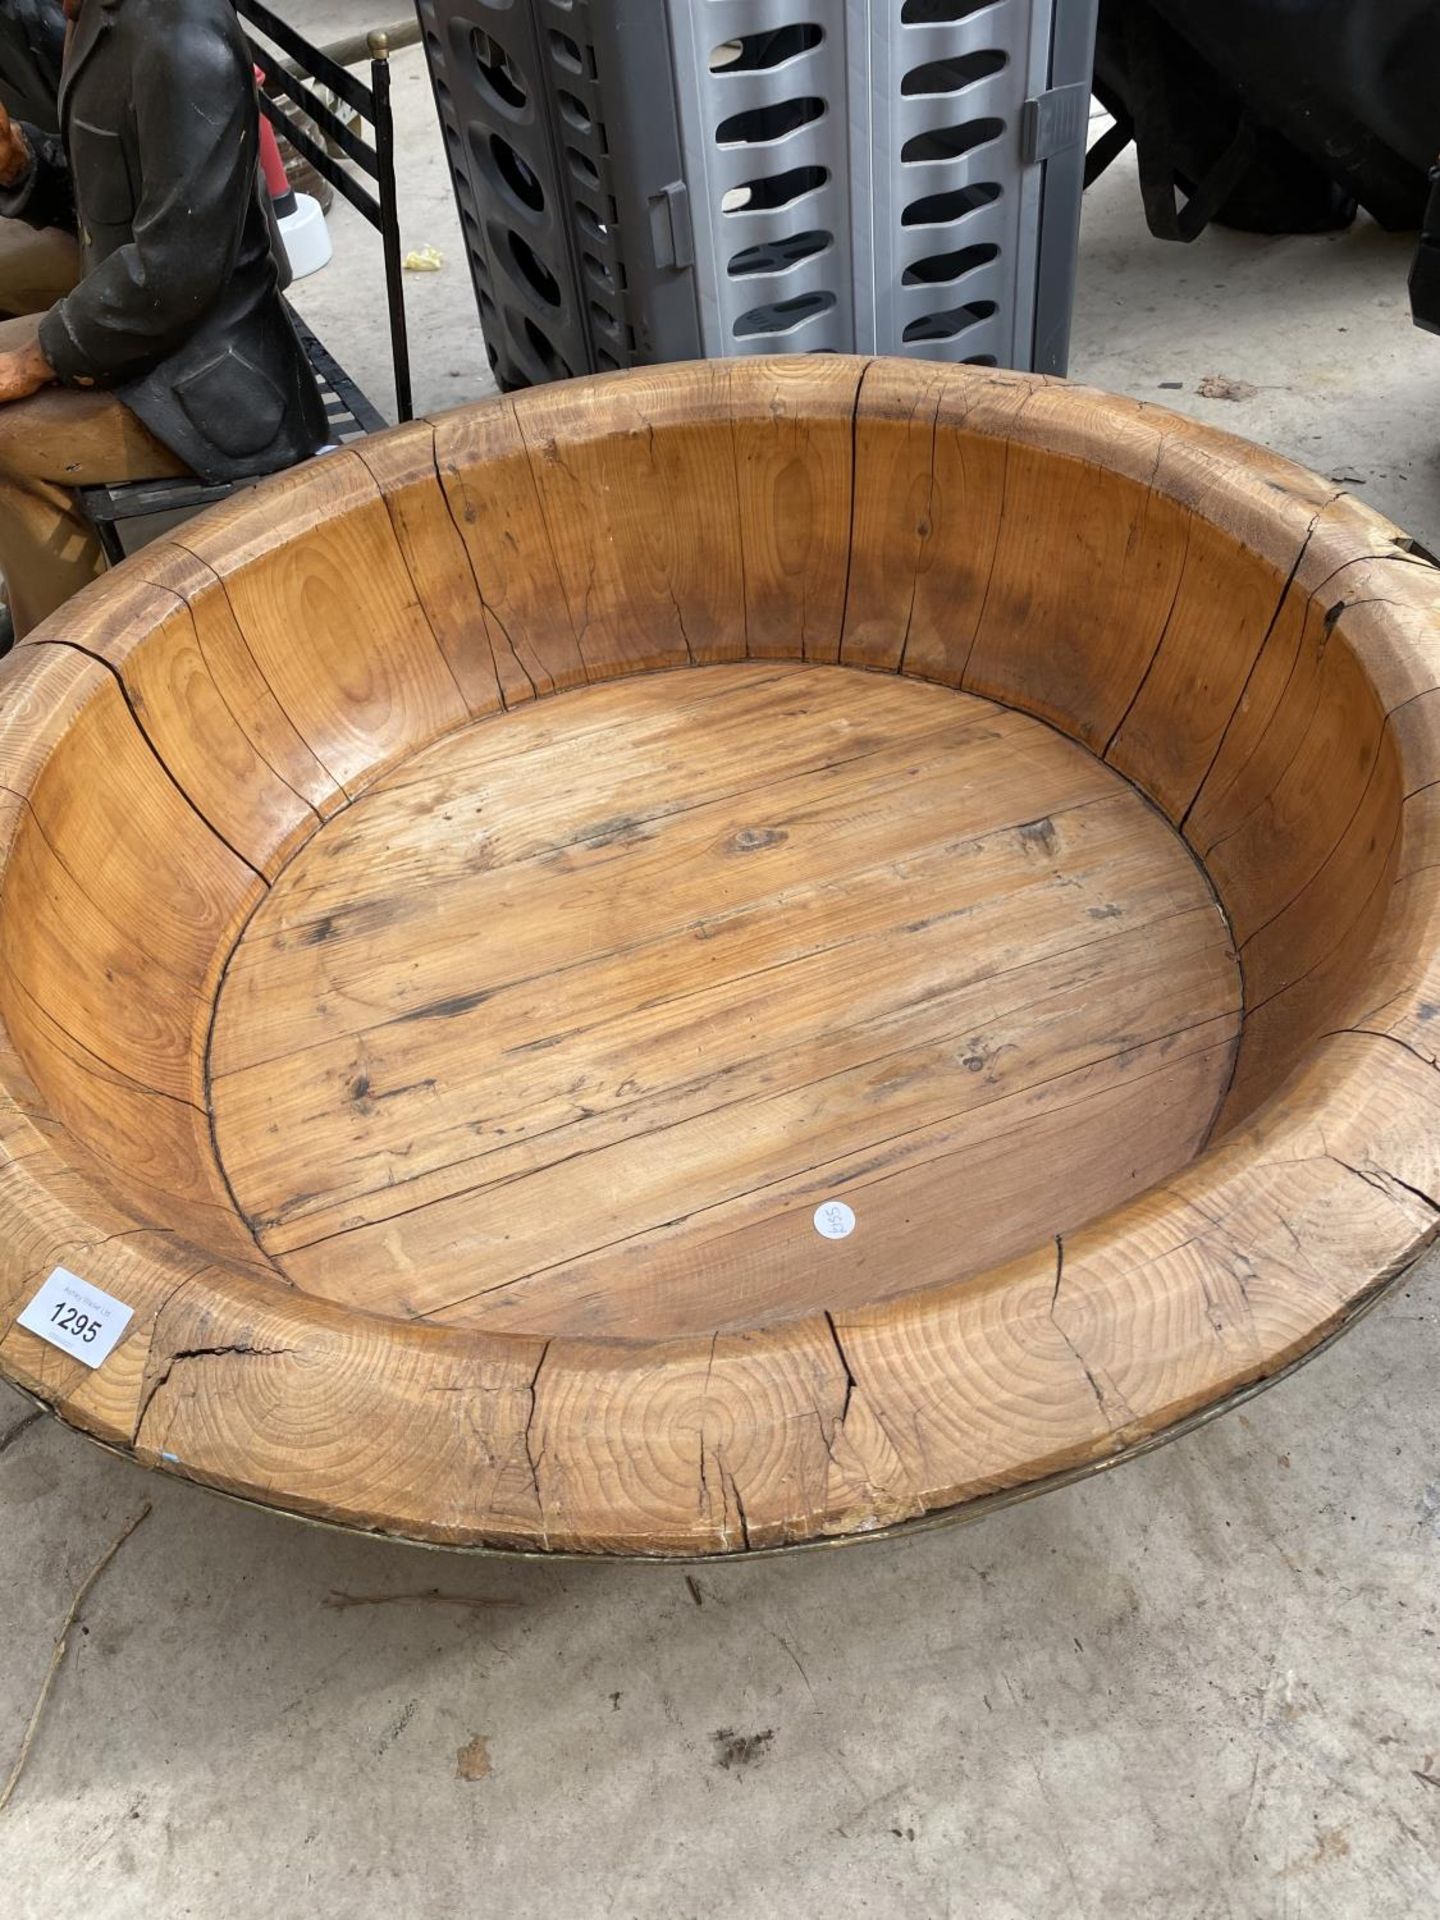 A LARGE WOODEN BOWL WITH METAL BANDING - Image 4 of 5